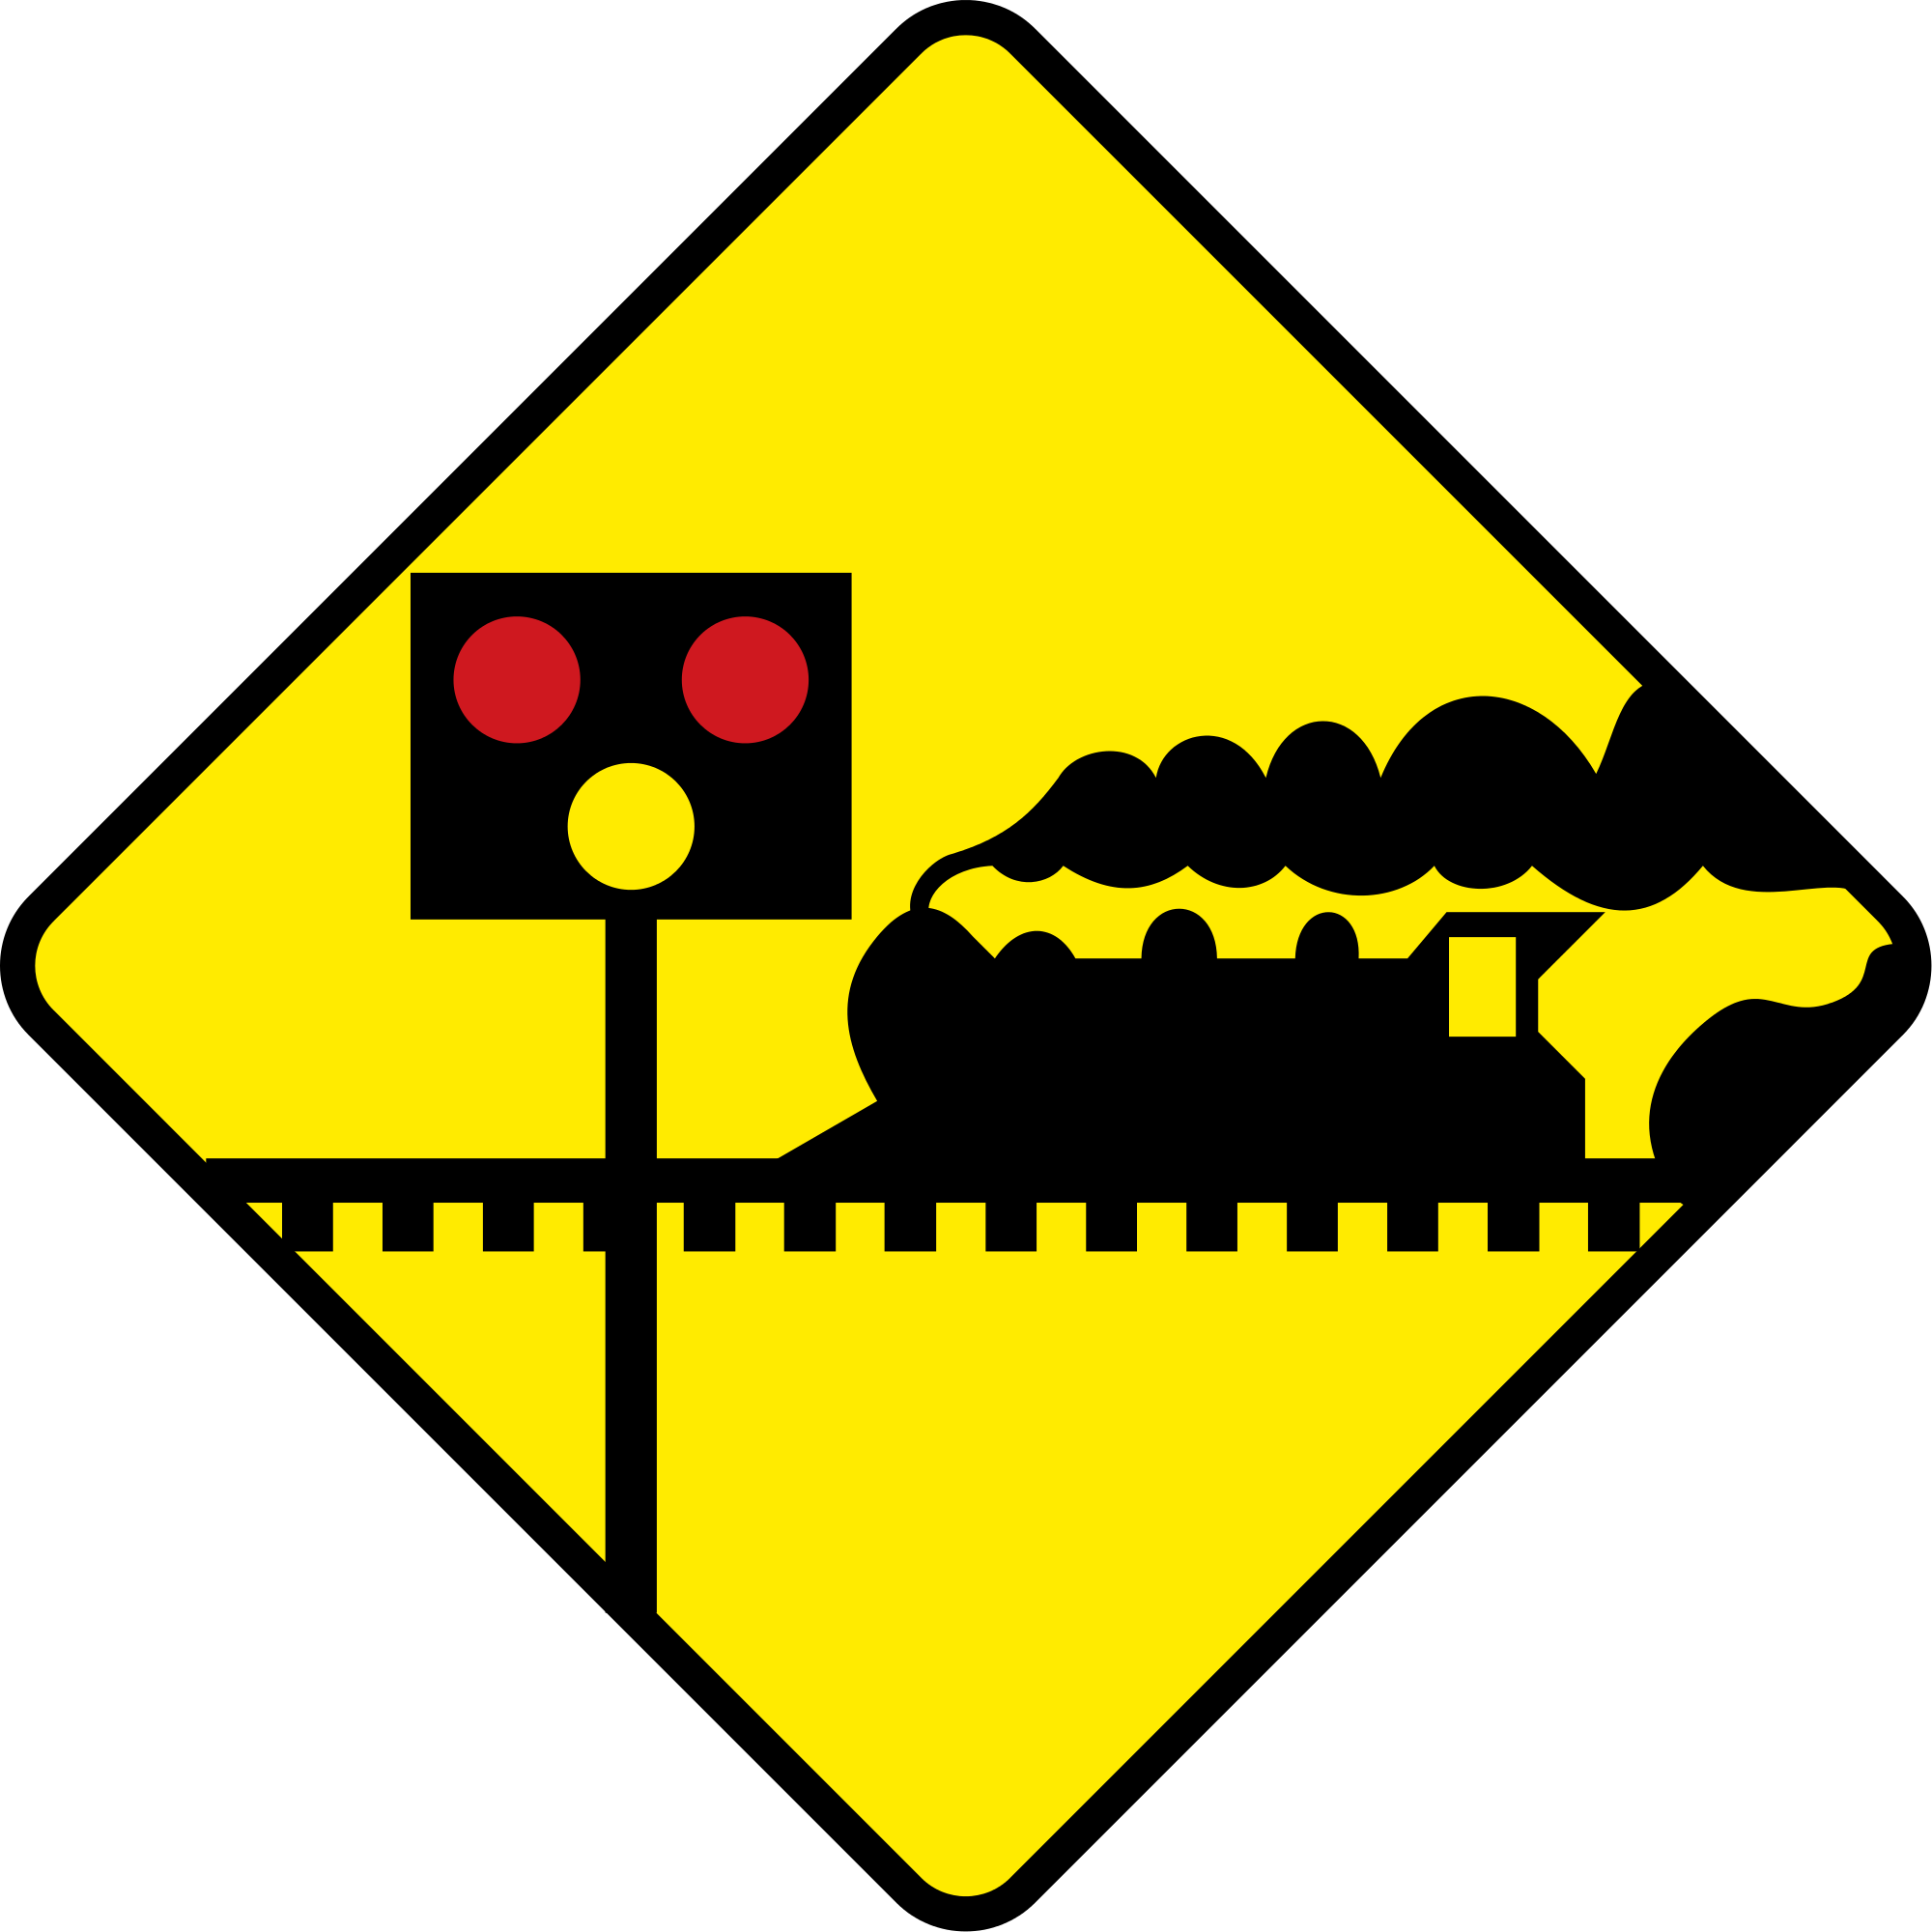 Traffic Sign Wikipedia The Free Encyclopedia Clipart Best